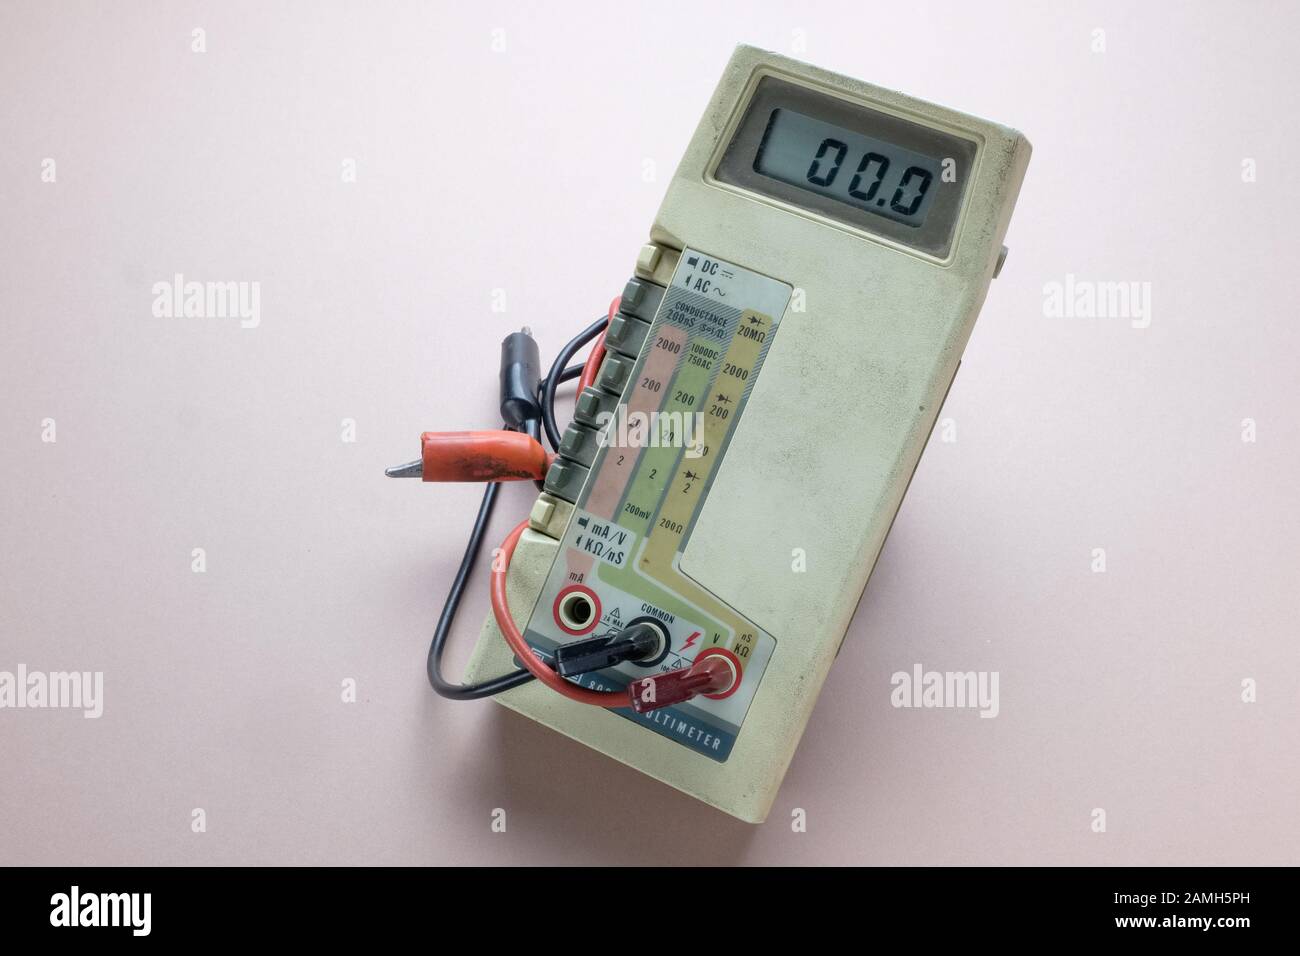 A piece of electronic test equipment - a digital multi-meter. It measures AC and DC voltages and current as well as resistance. With test leads Stock Photo